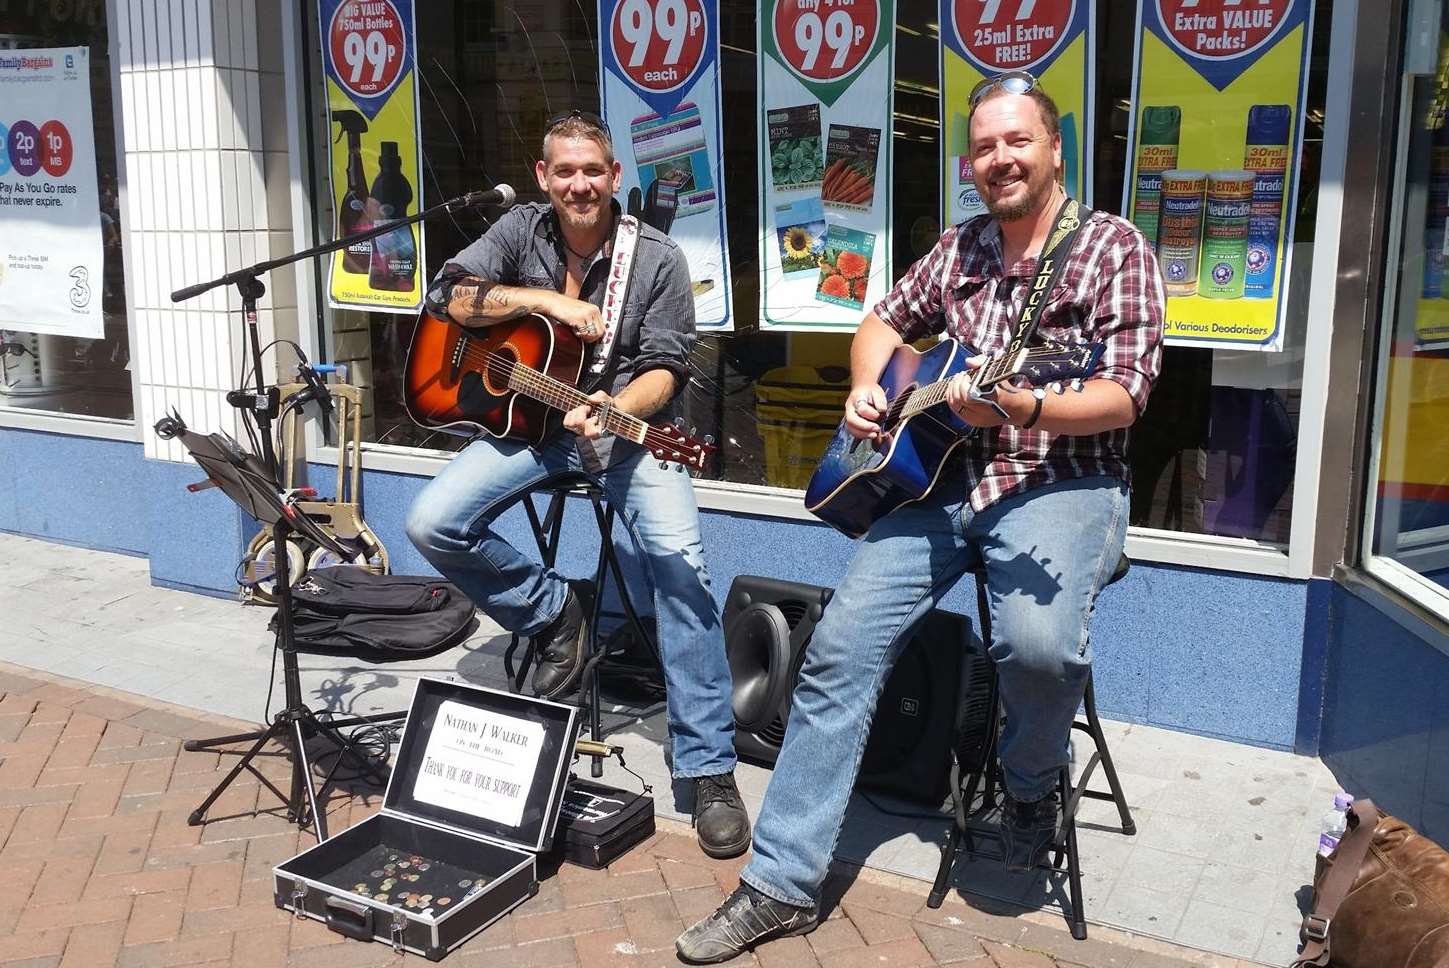 The Dog Tooth Duo busking in Ashford Town Centre